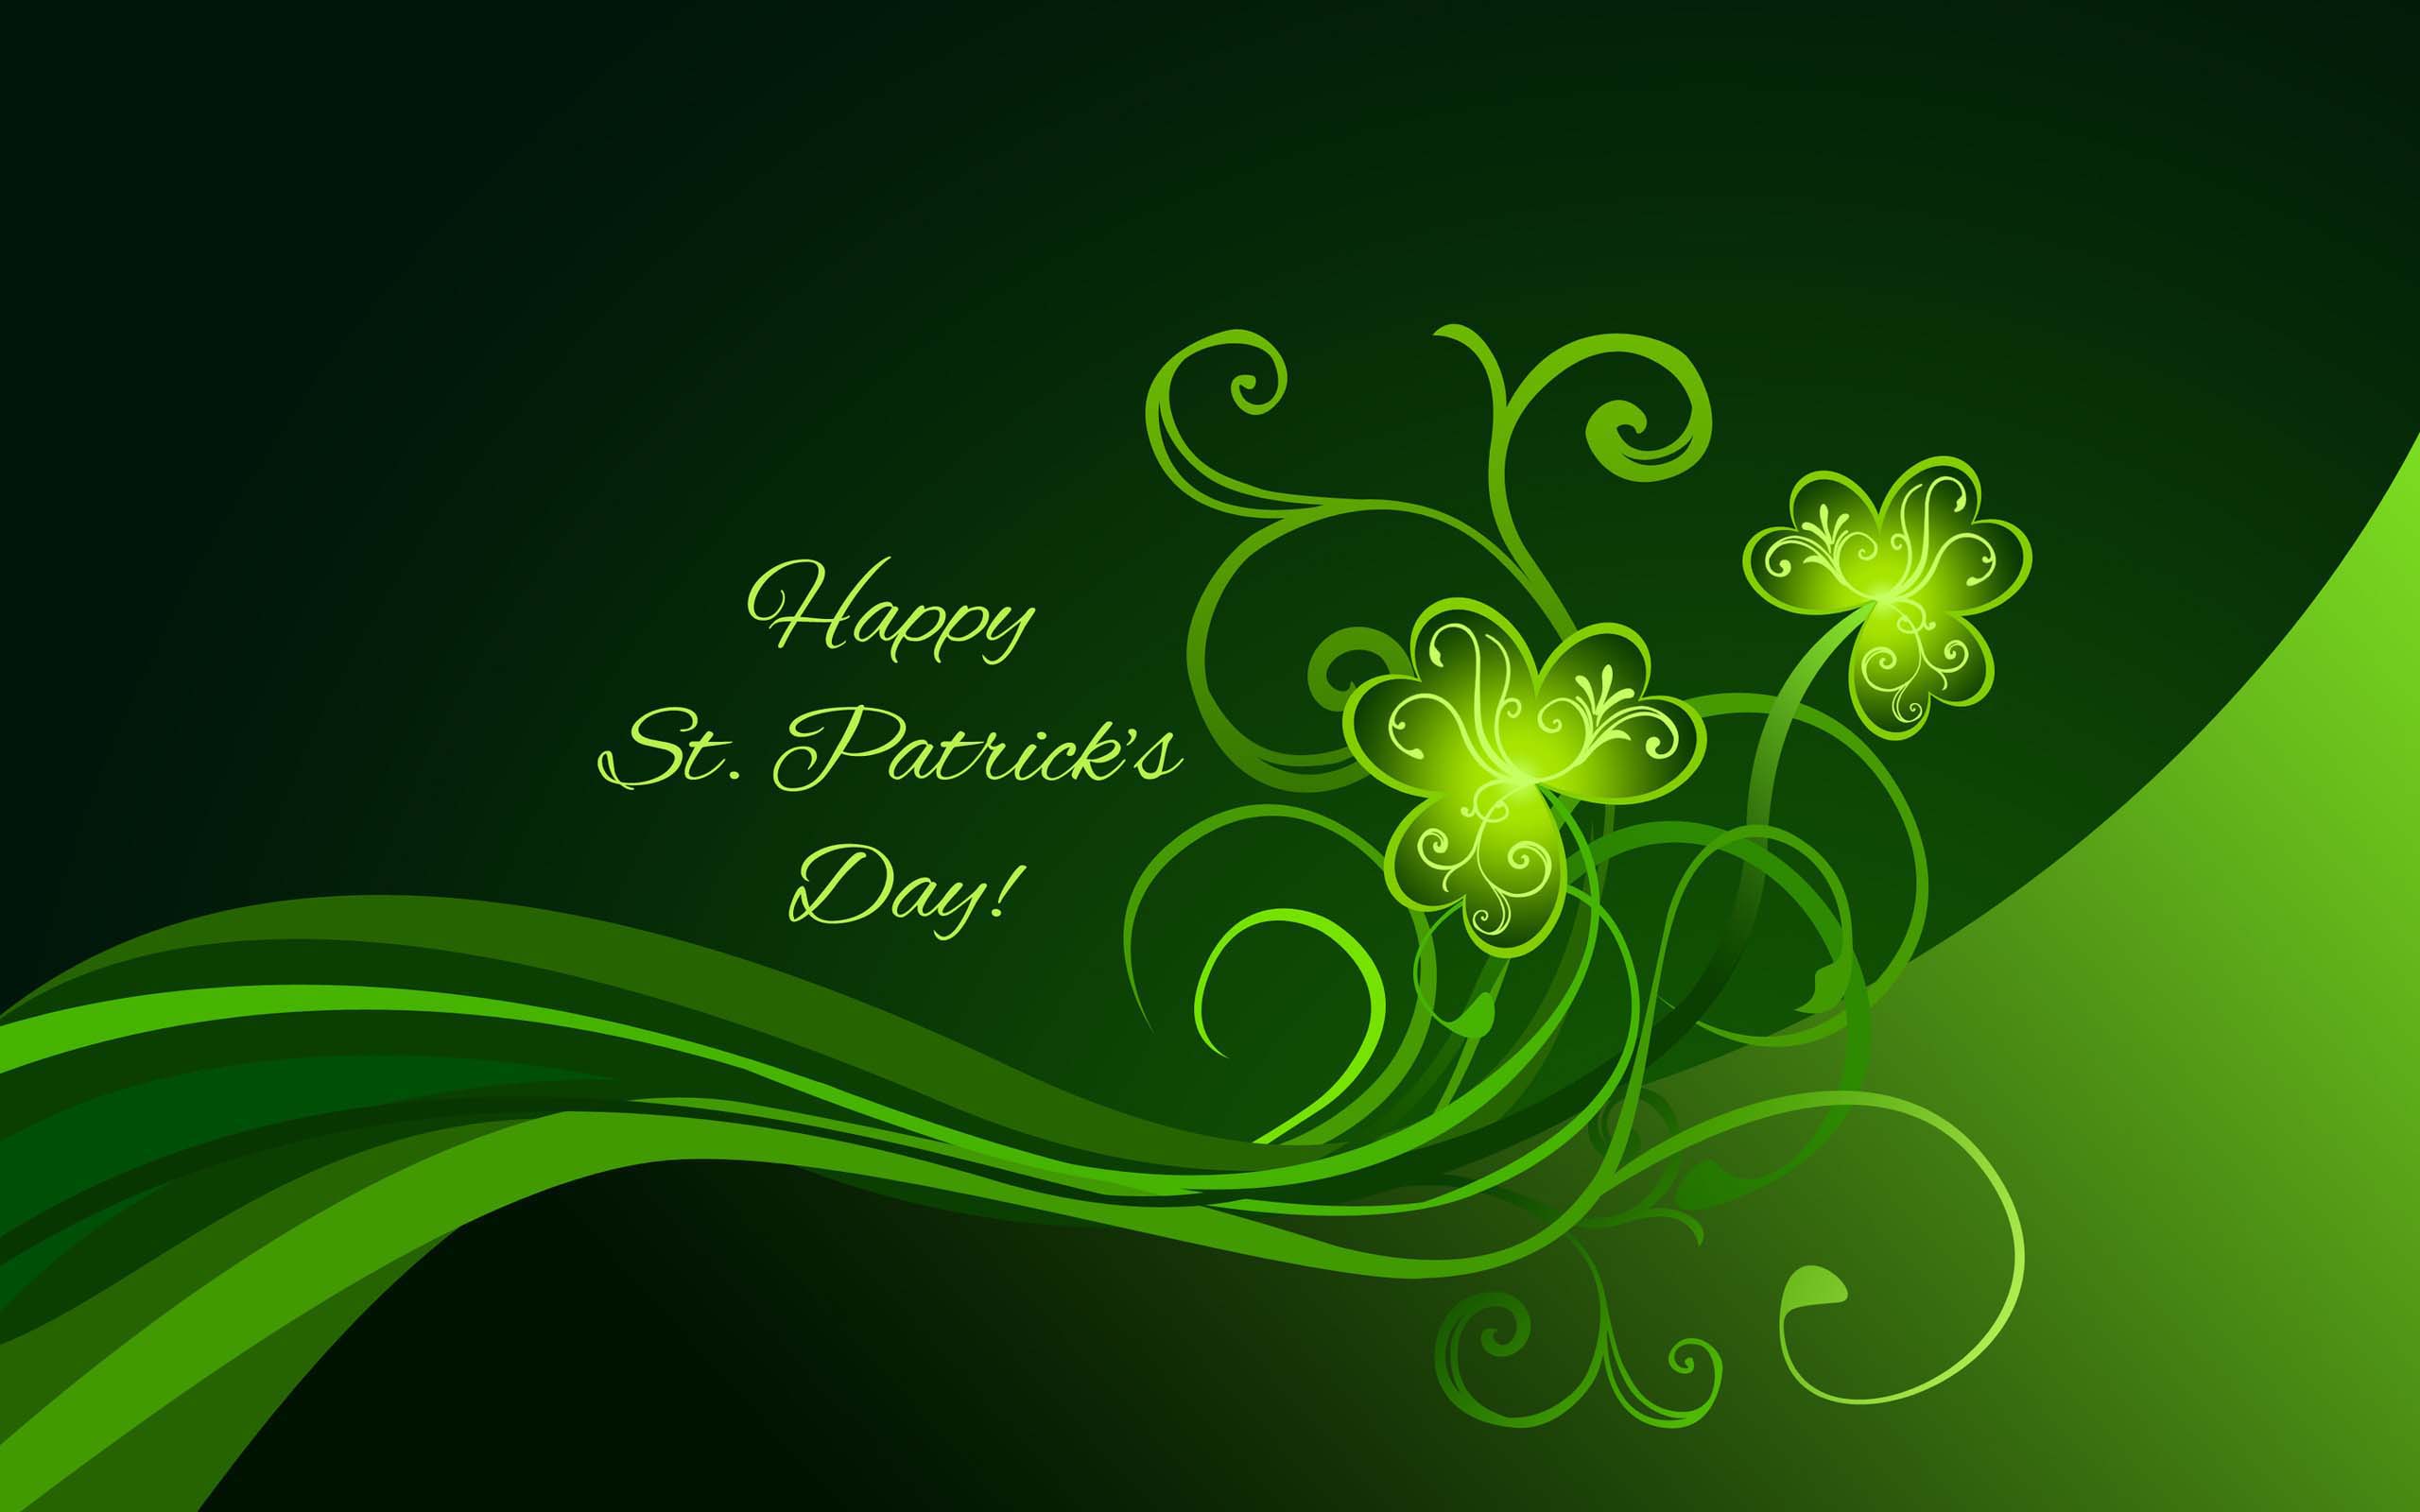 Happy Saint Patricks Day Wishes Quotes Sayings Images Funny